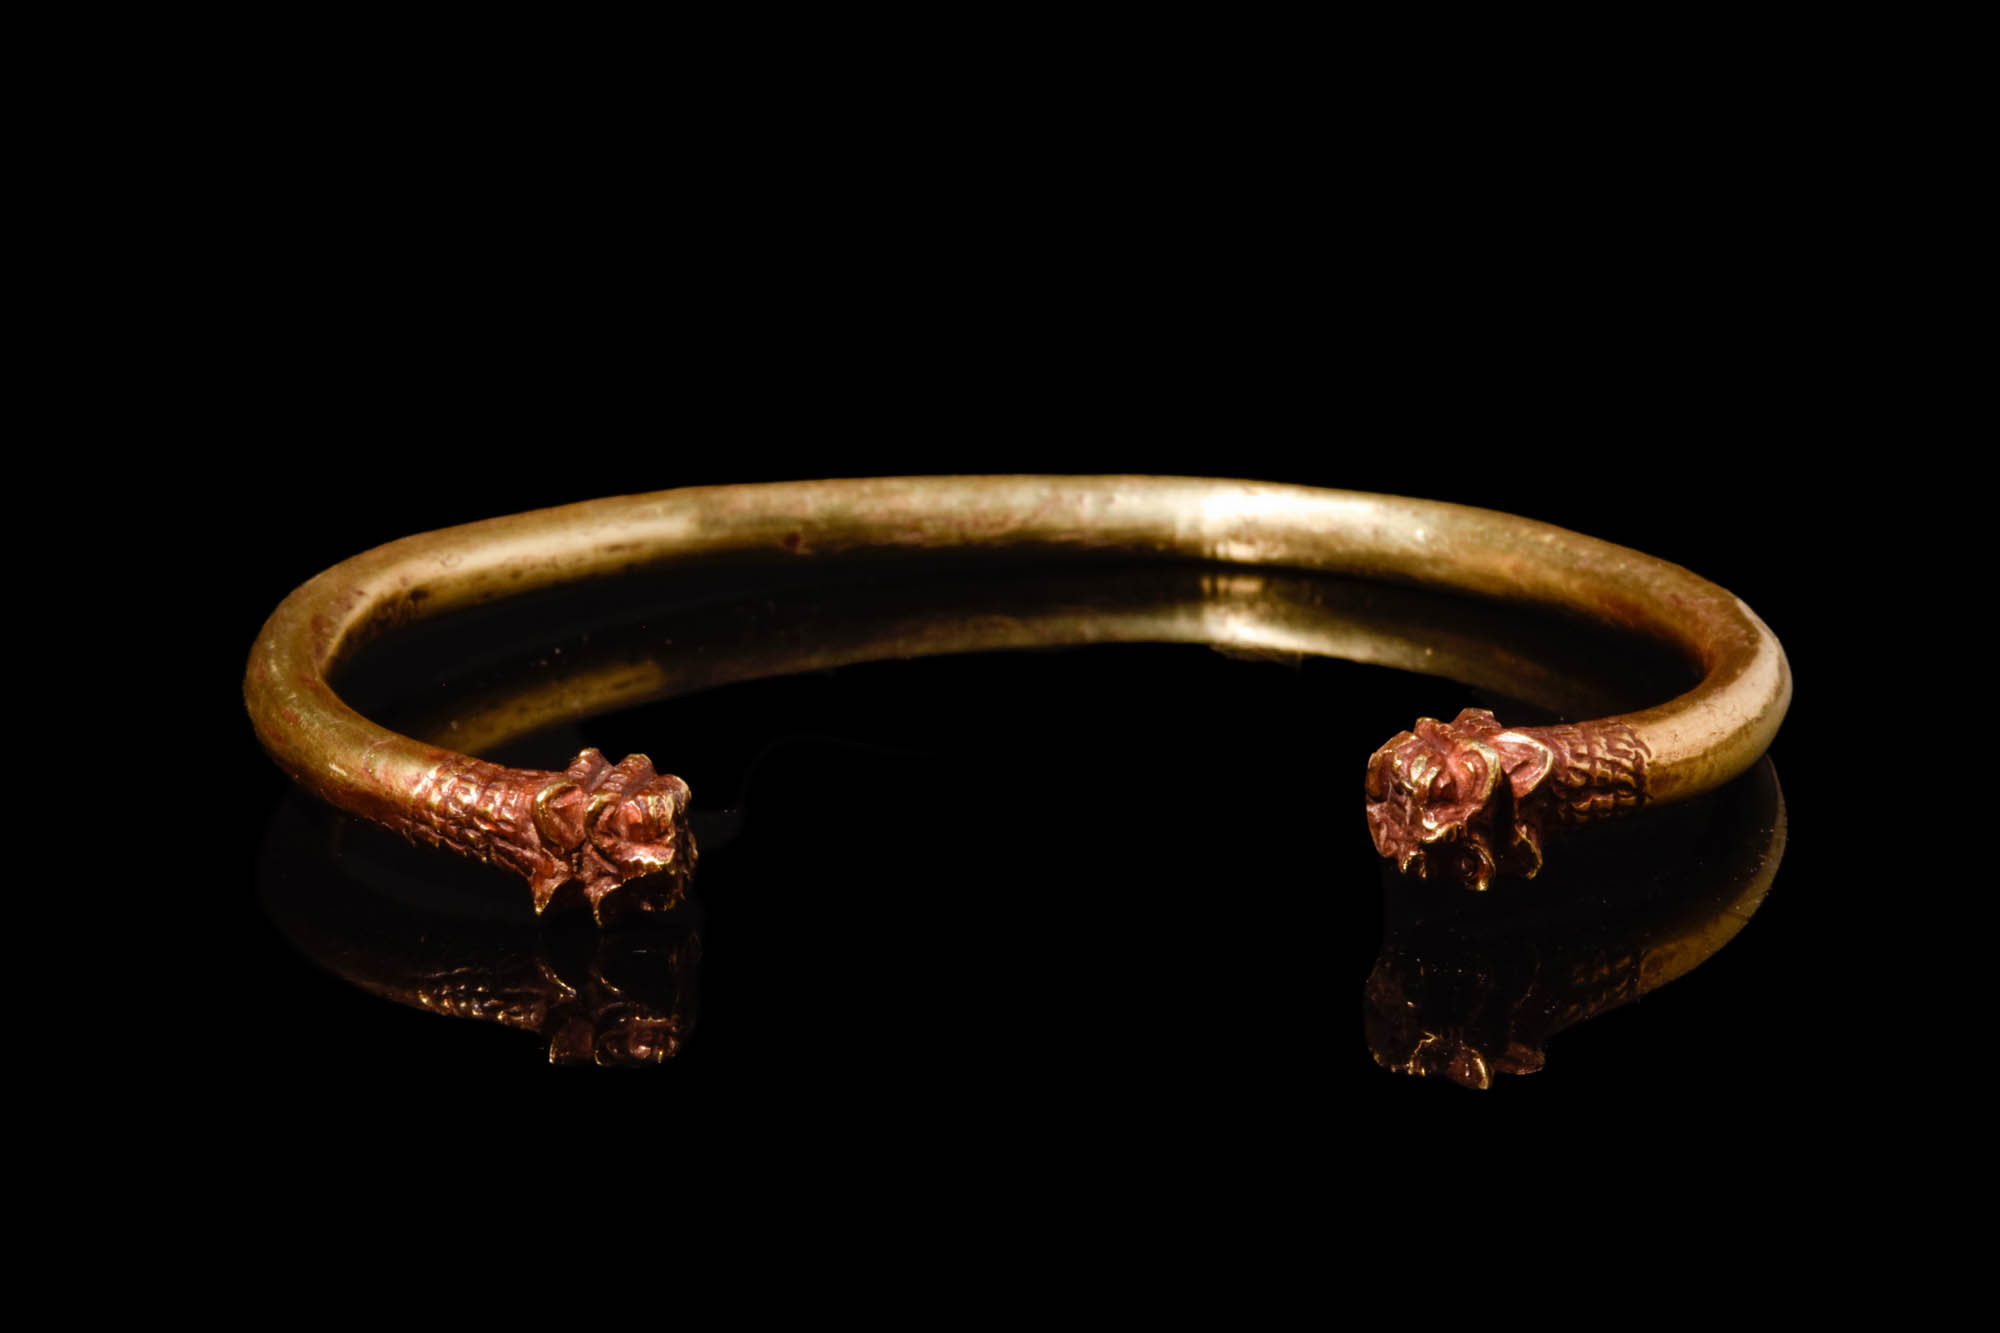 HELLENISTIC GOLD BRACELET DECORATED WITH LION HEAD TERMINALS - Image 5 of 5